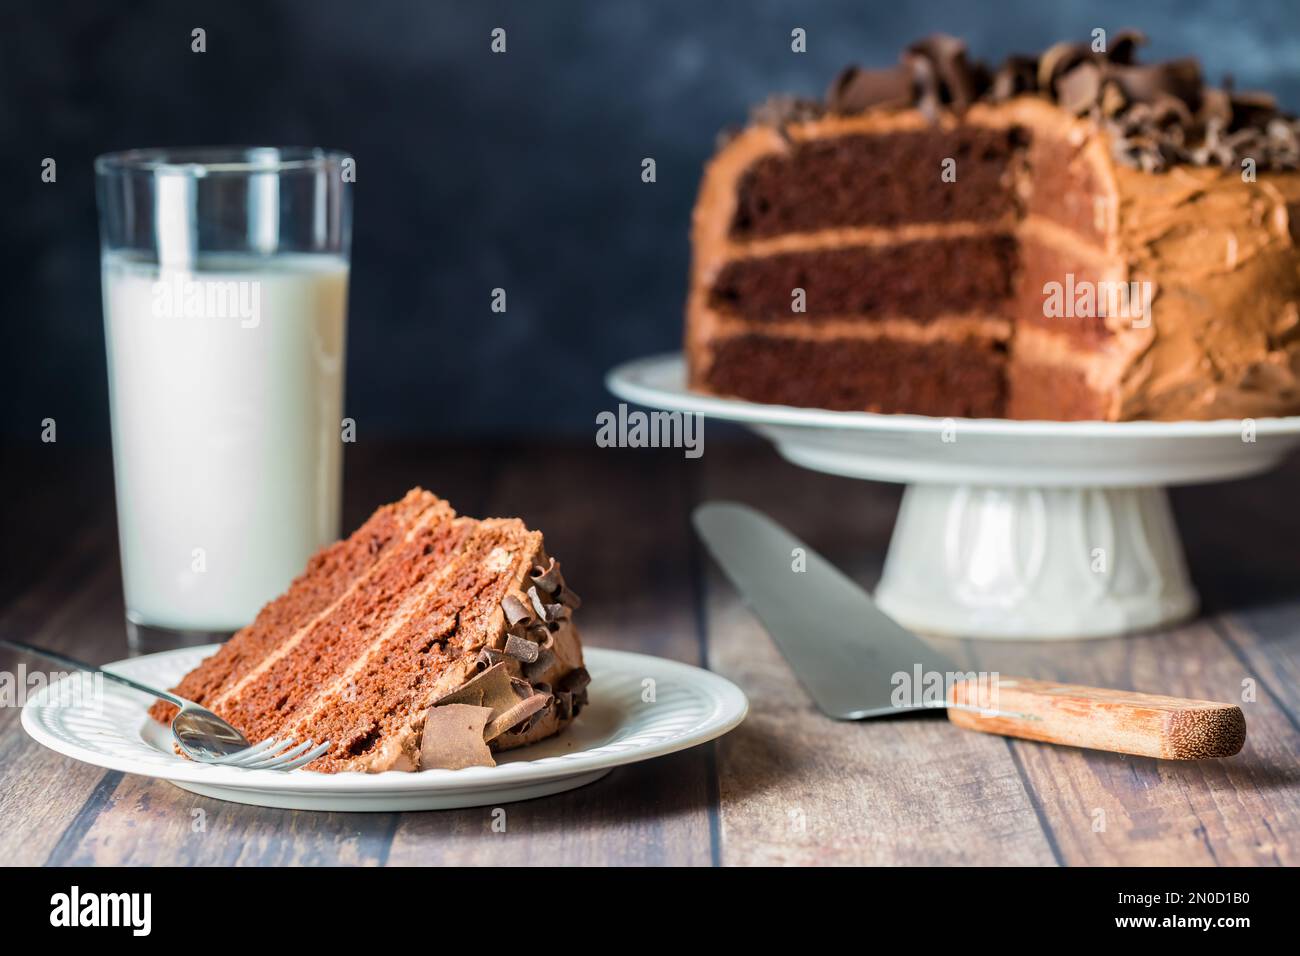 A slice of moist and delicious chocolate cake served with a cold glass of milk. Stock Photo